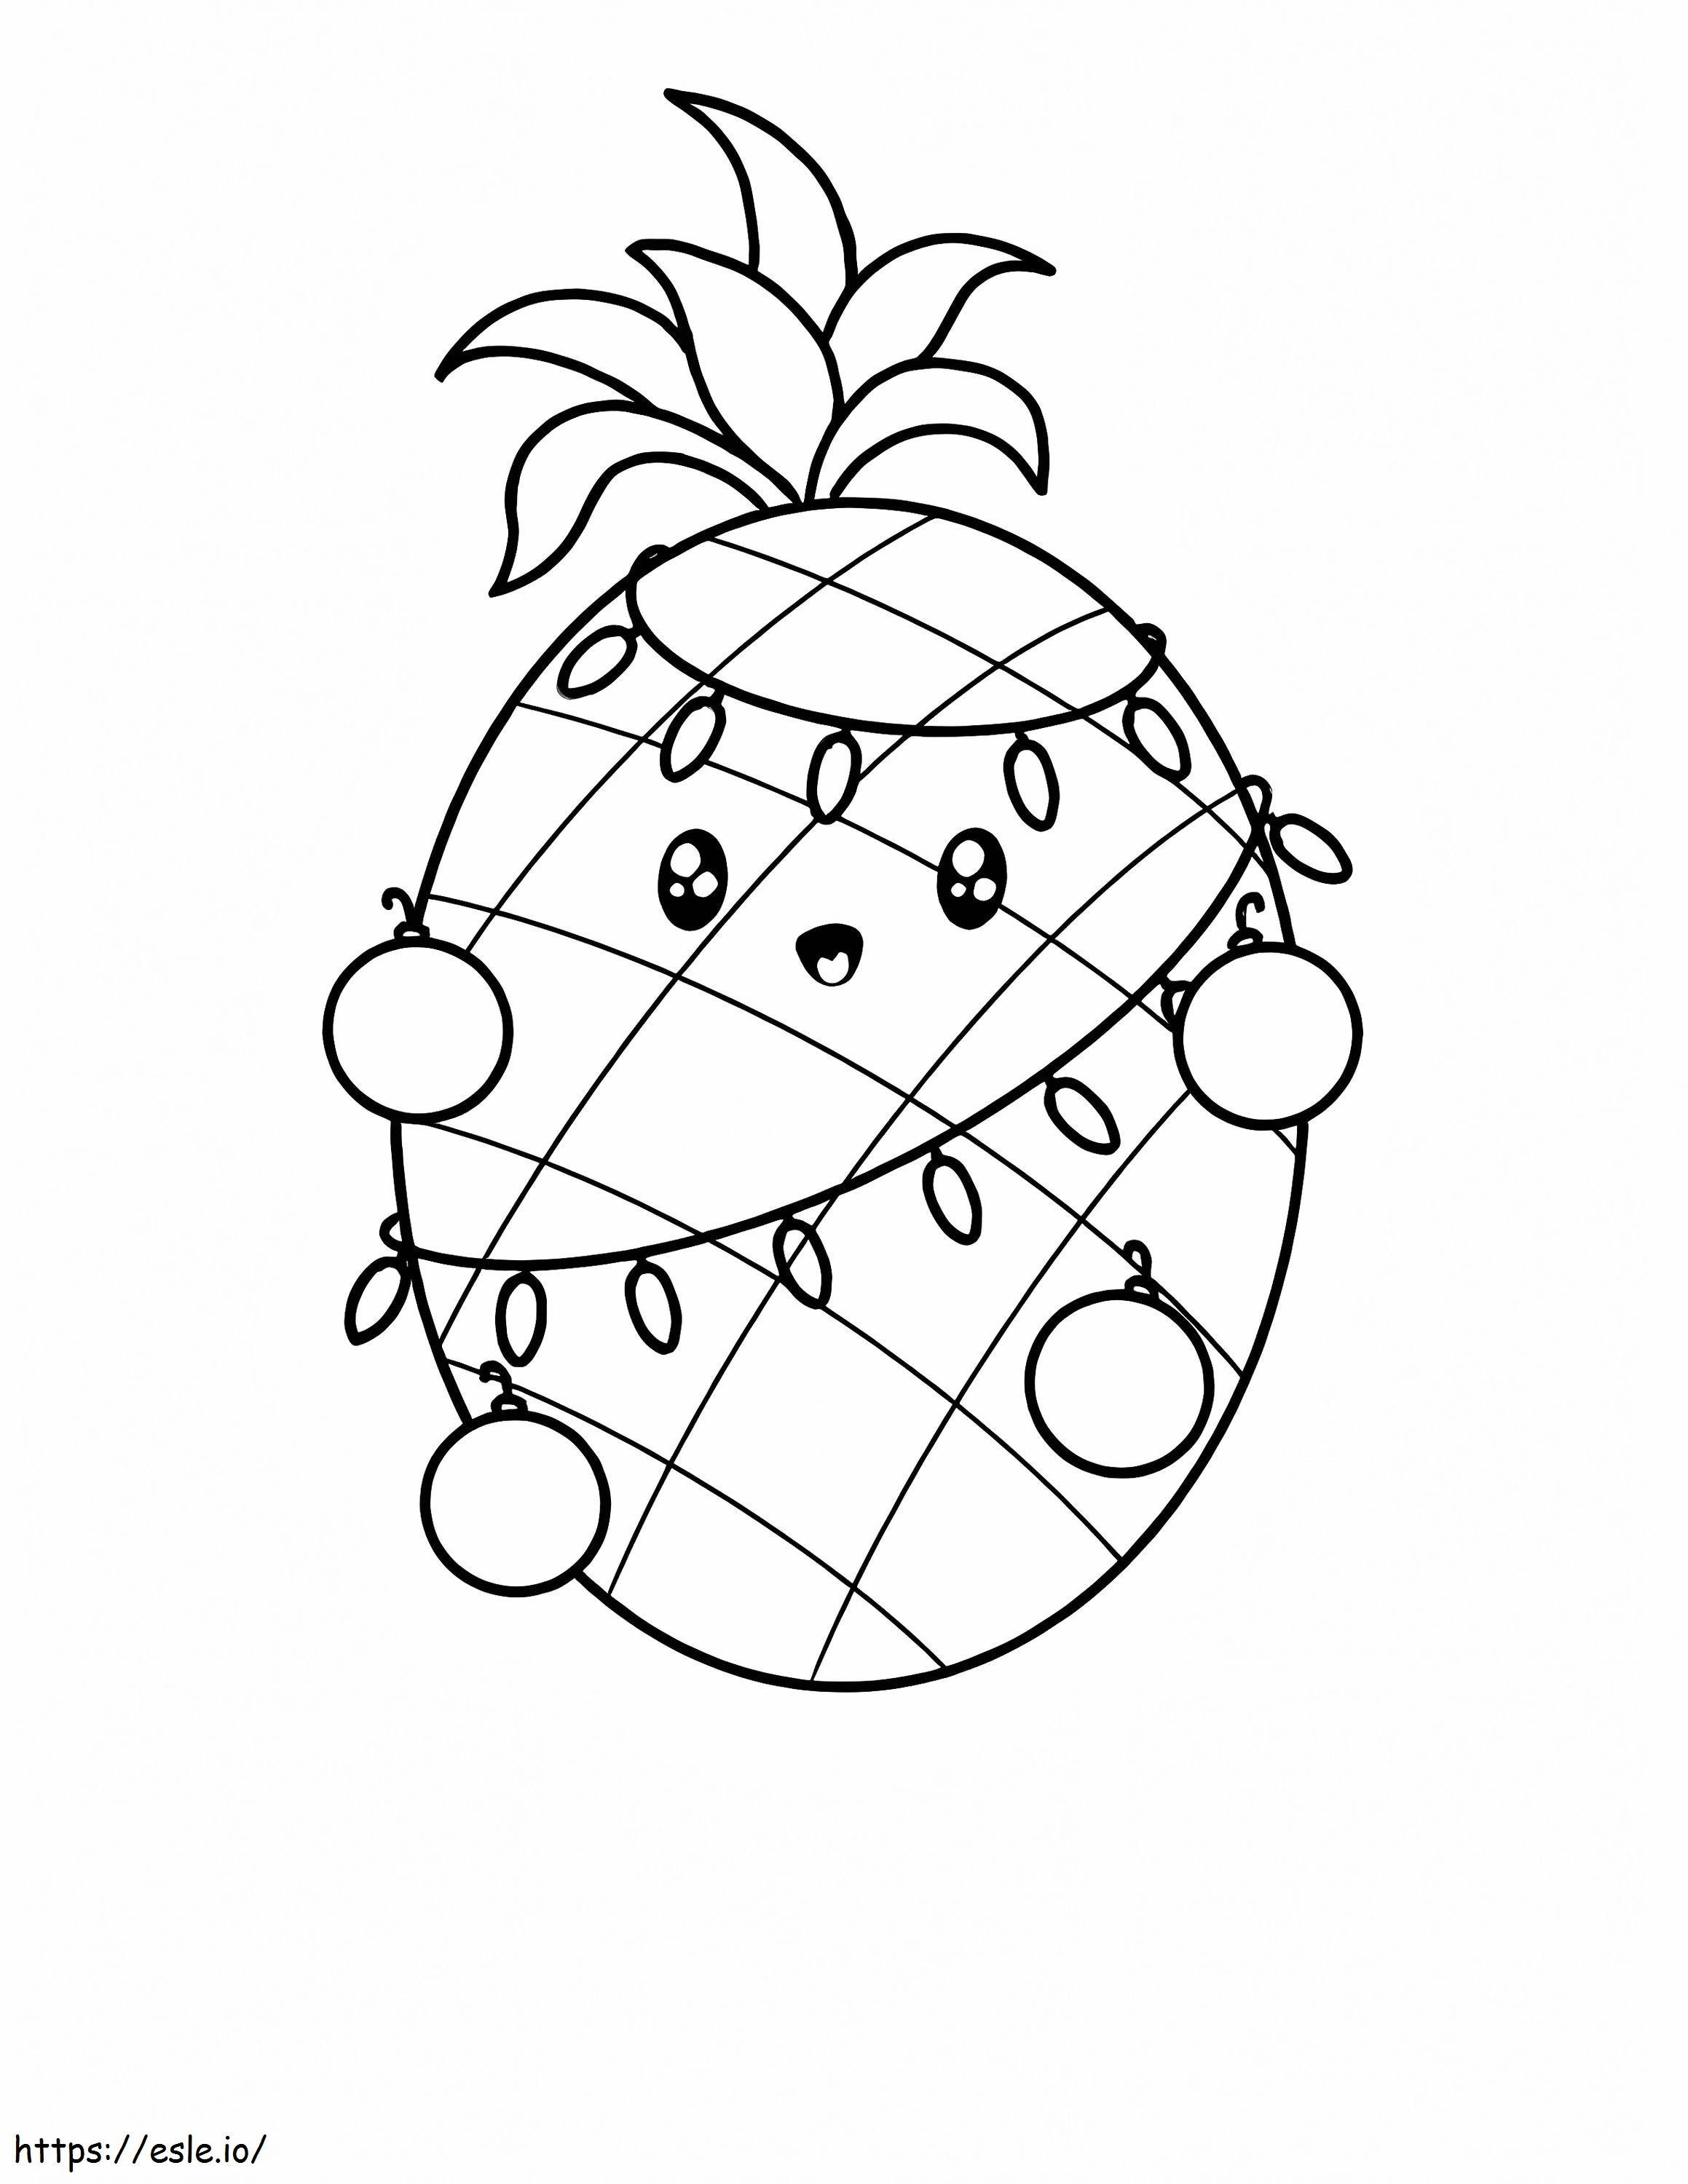 Pineapple At Christmas coloring page